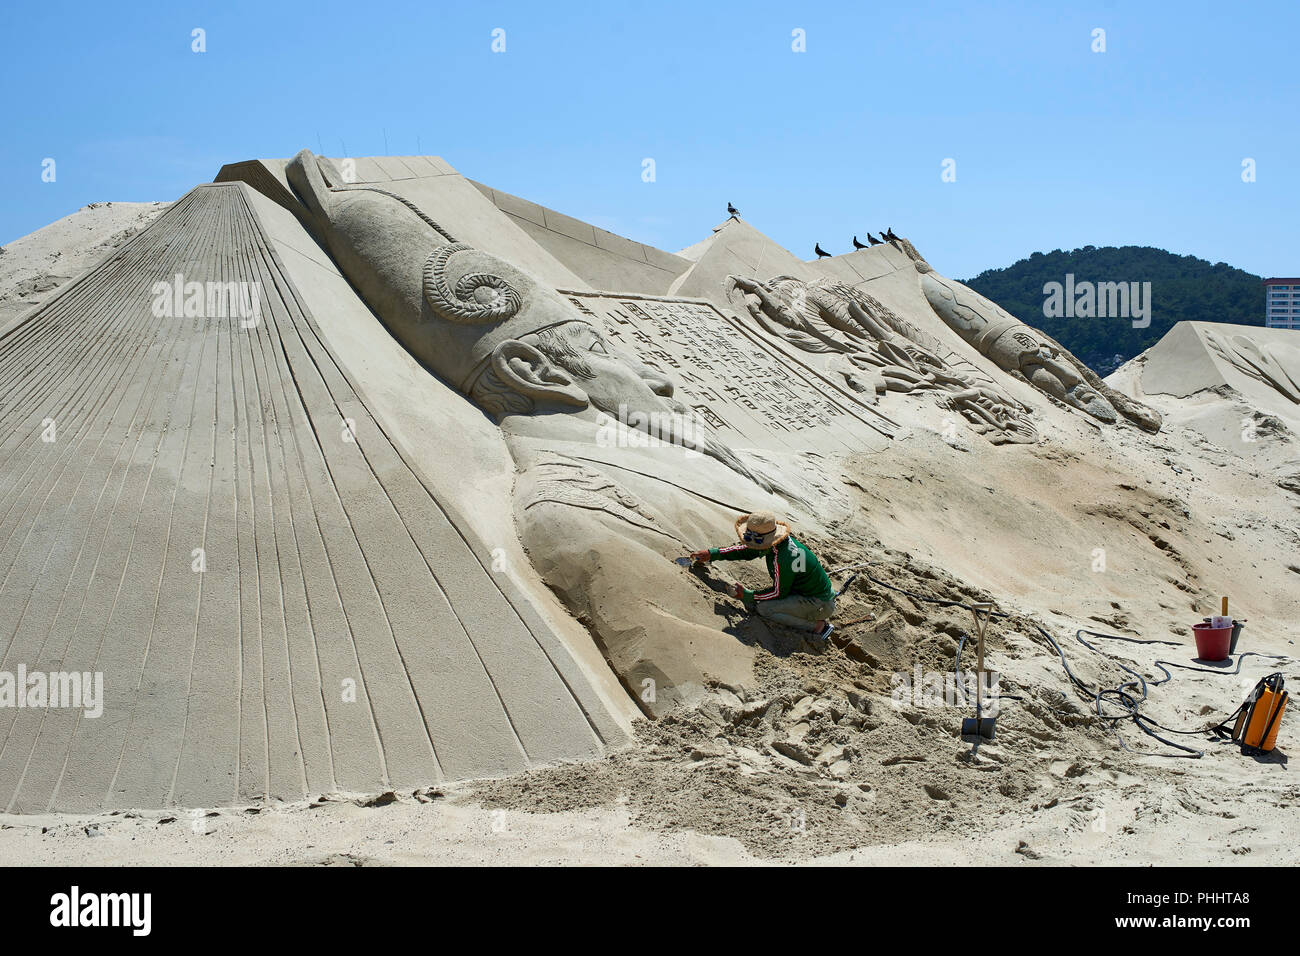 2018 Haeundae Sand Festival, Busan. Large sculpture of King Sejong. Artist carefully working on the nearly complete piece of art. Stock Photo